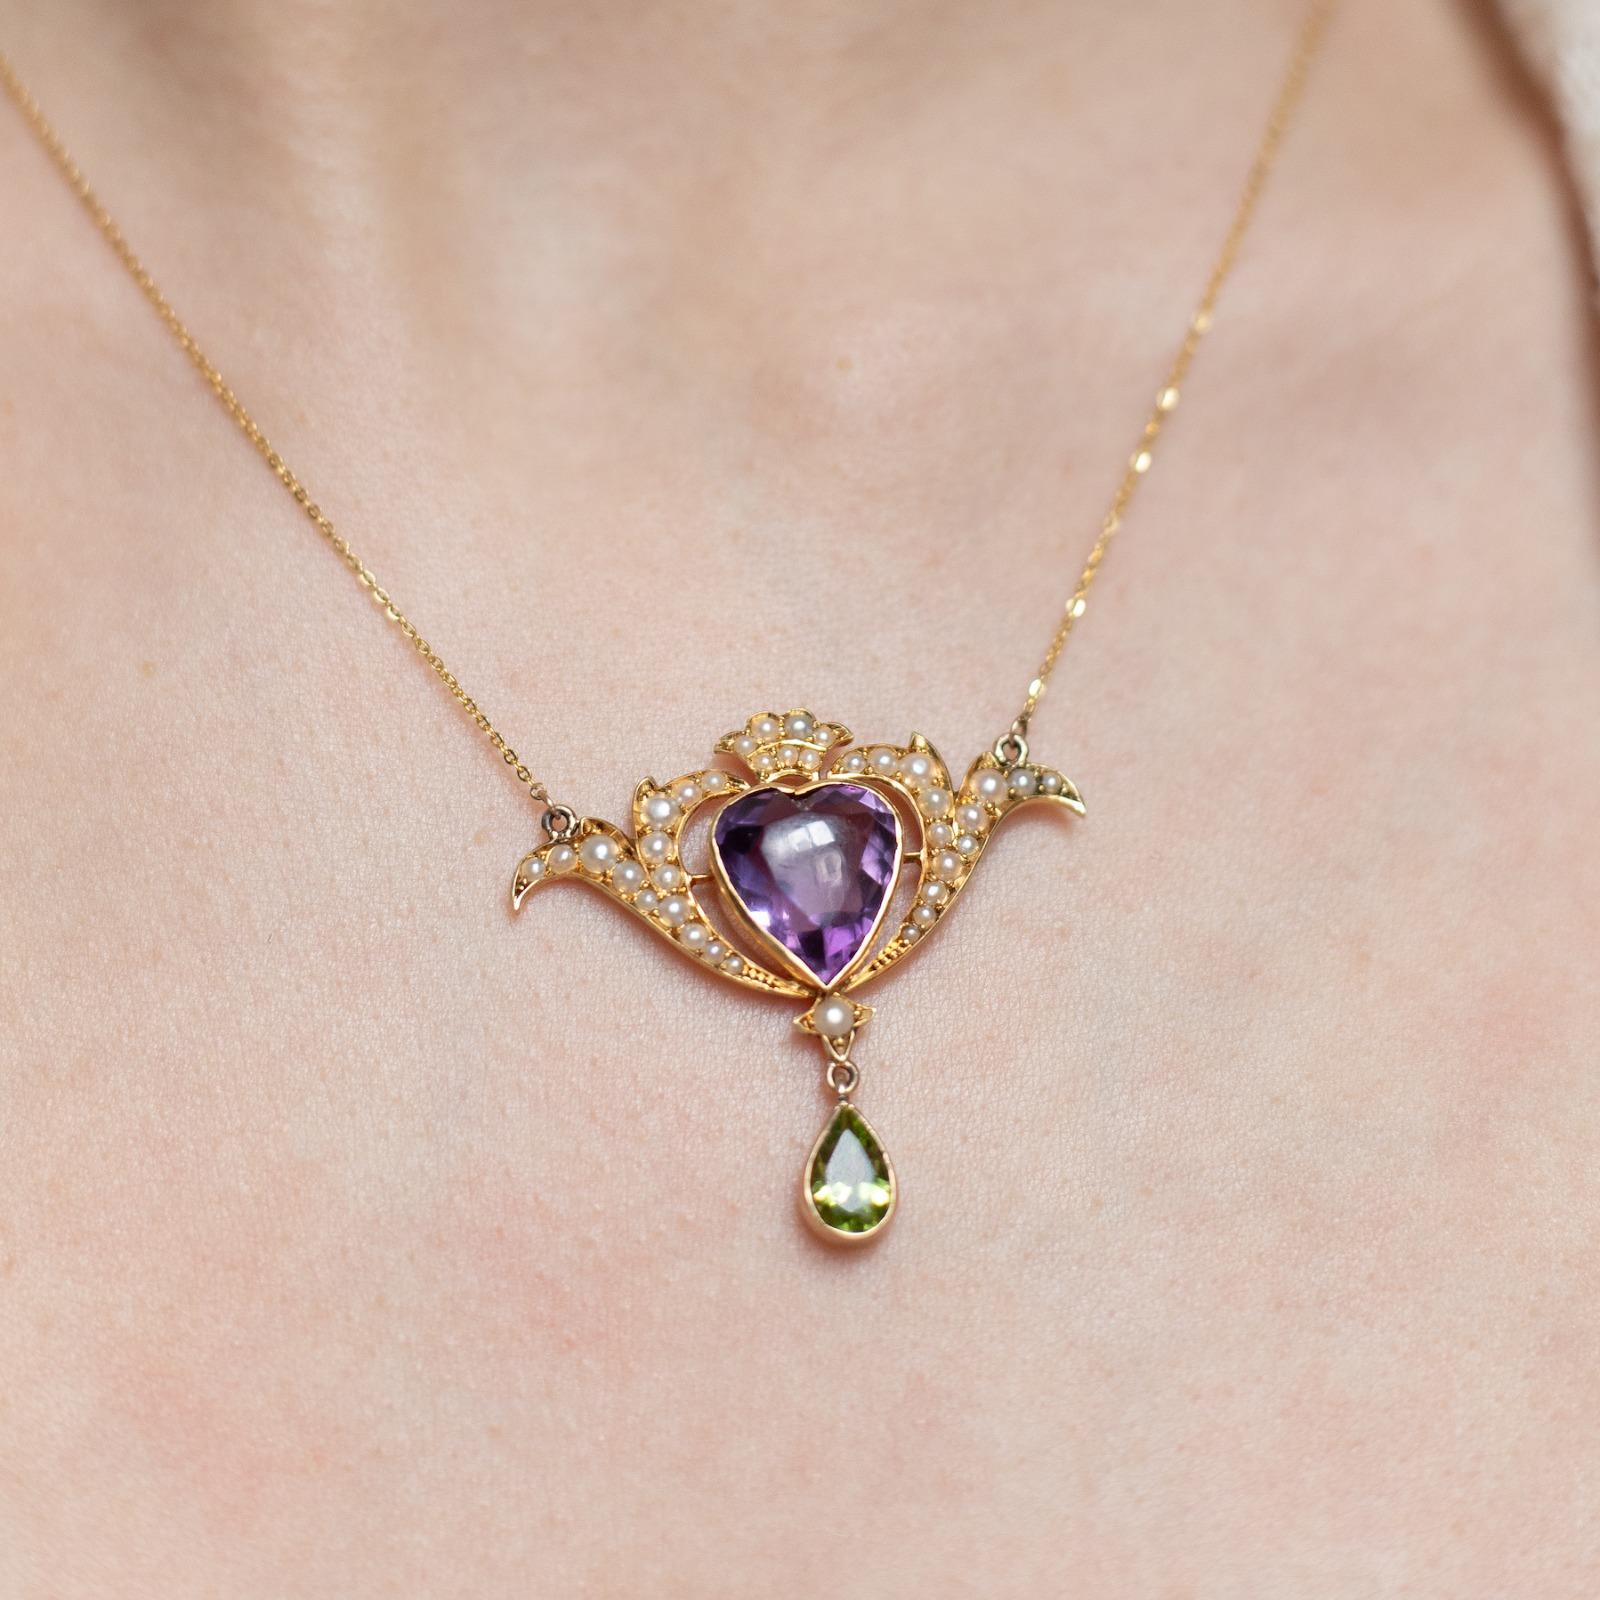 Murrle Bennett & Co Art Nouveau Amethyst Pearl Yellow Gold Heart Necklace In Good Condition For Sale In London, GB